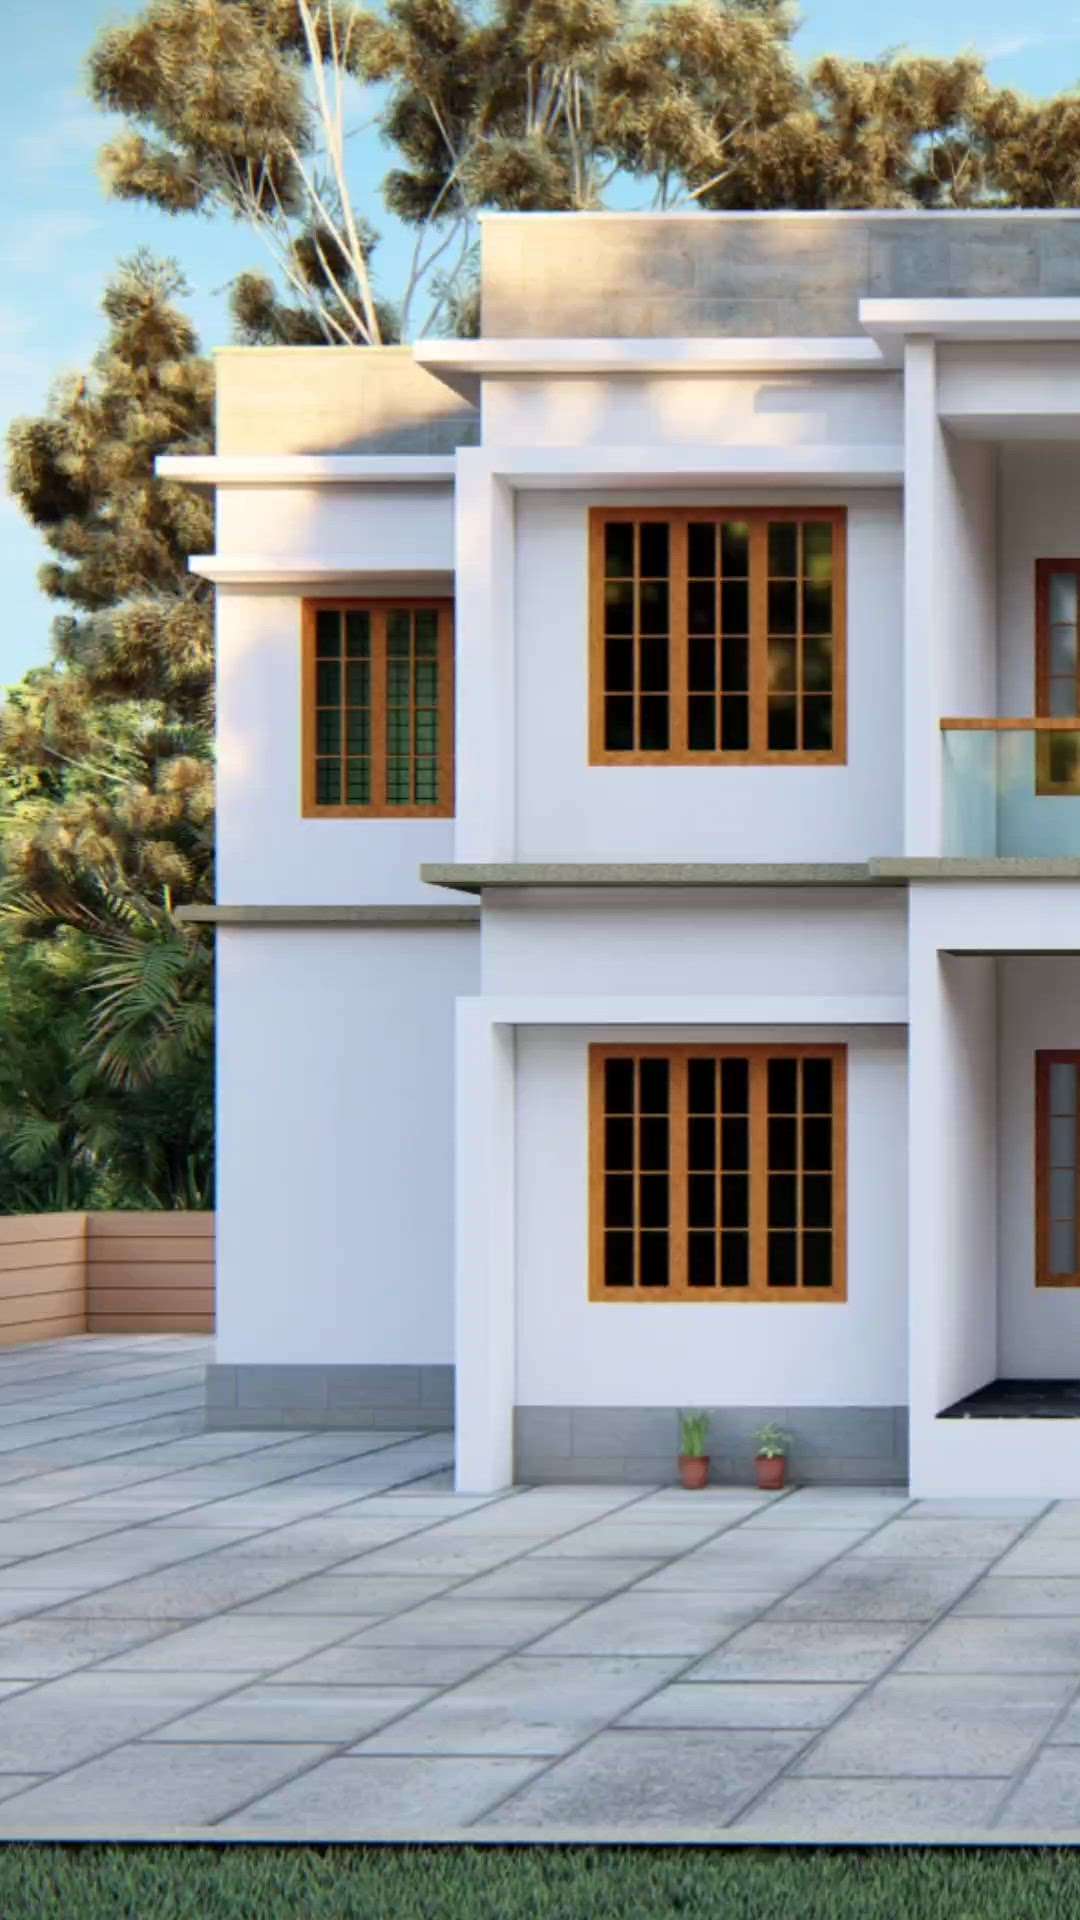 budget home design #KeralaStyleHouse #keralahomeplans #keralaarchitectures #HomeAutomation #hometour #architecturedesigns #kerala_architecture #ContemporaryHouse #5LakhHouse #HouseConstruction